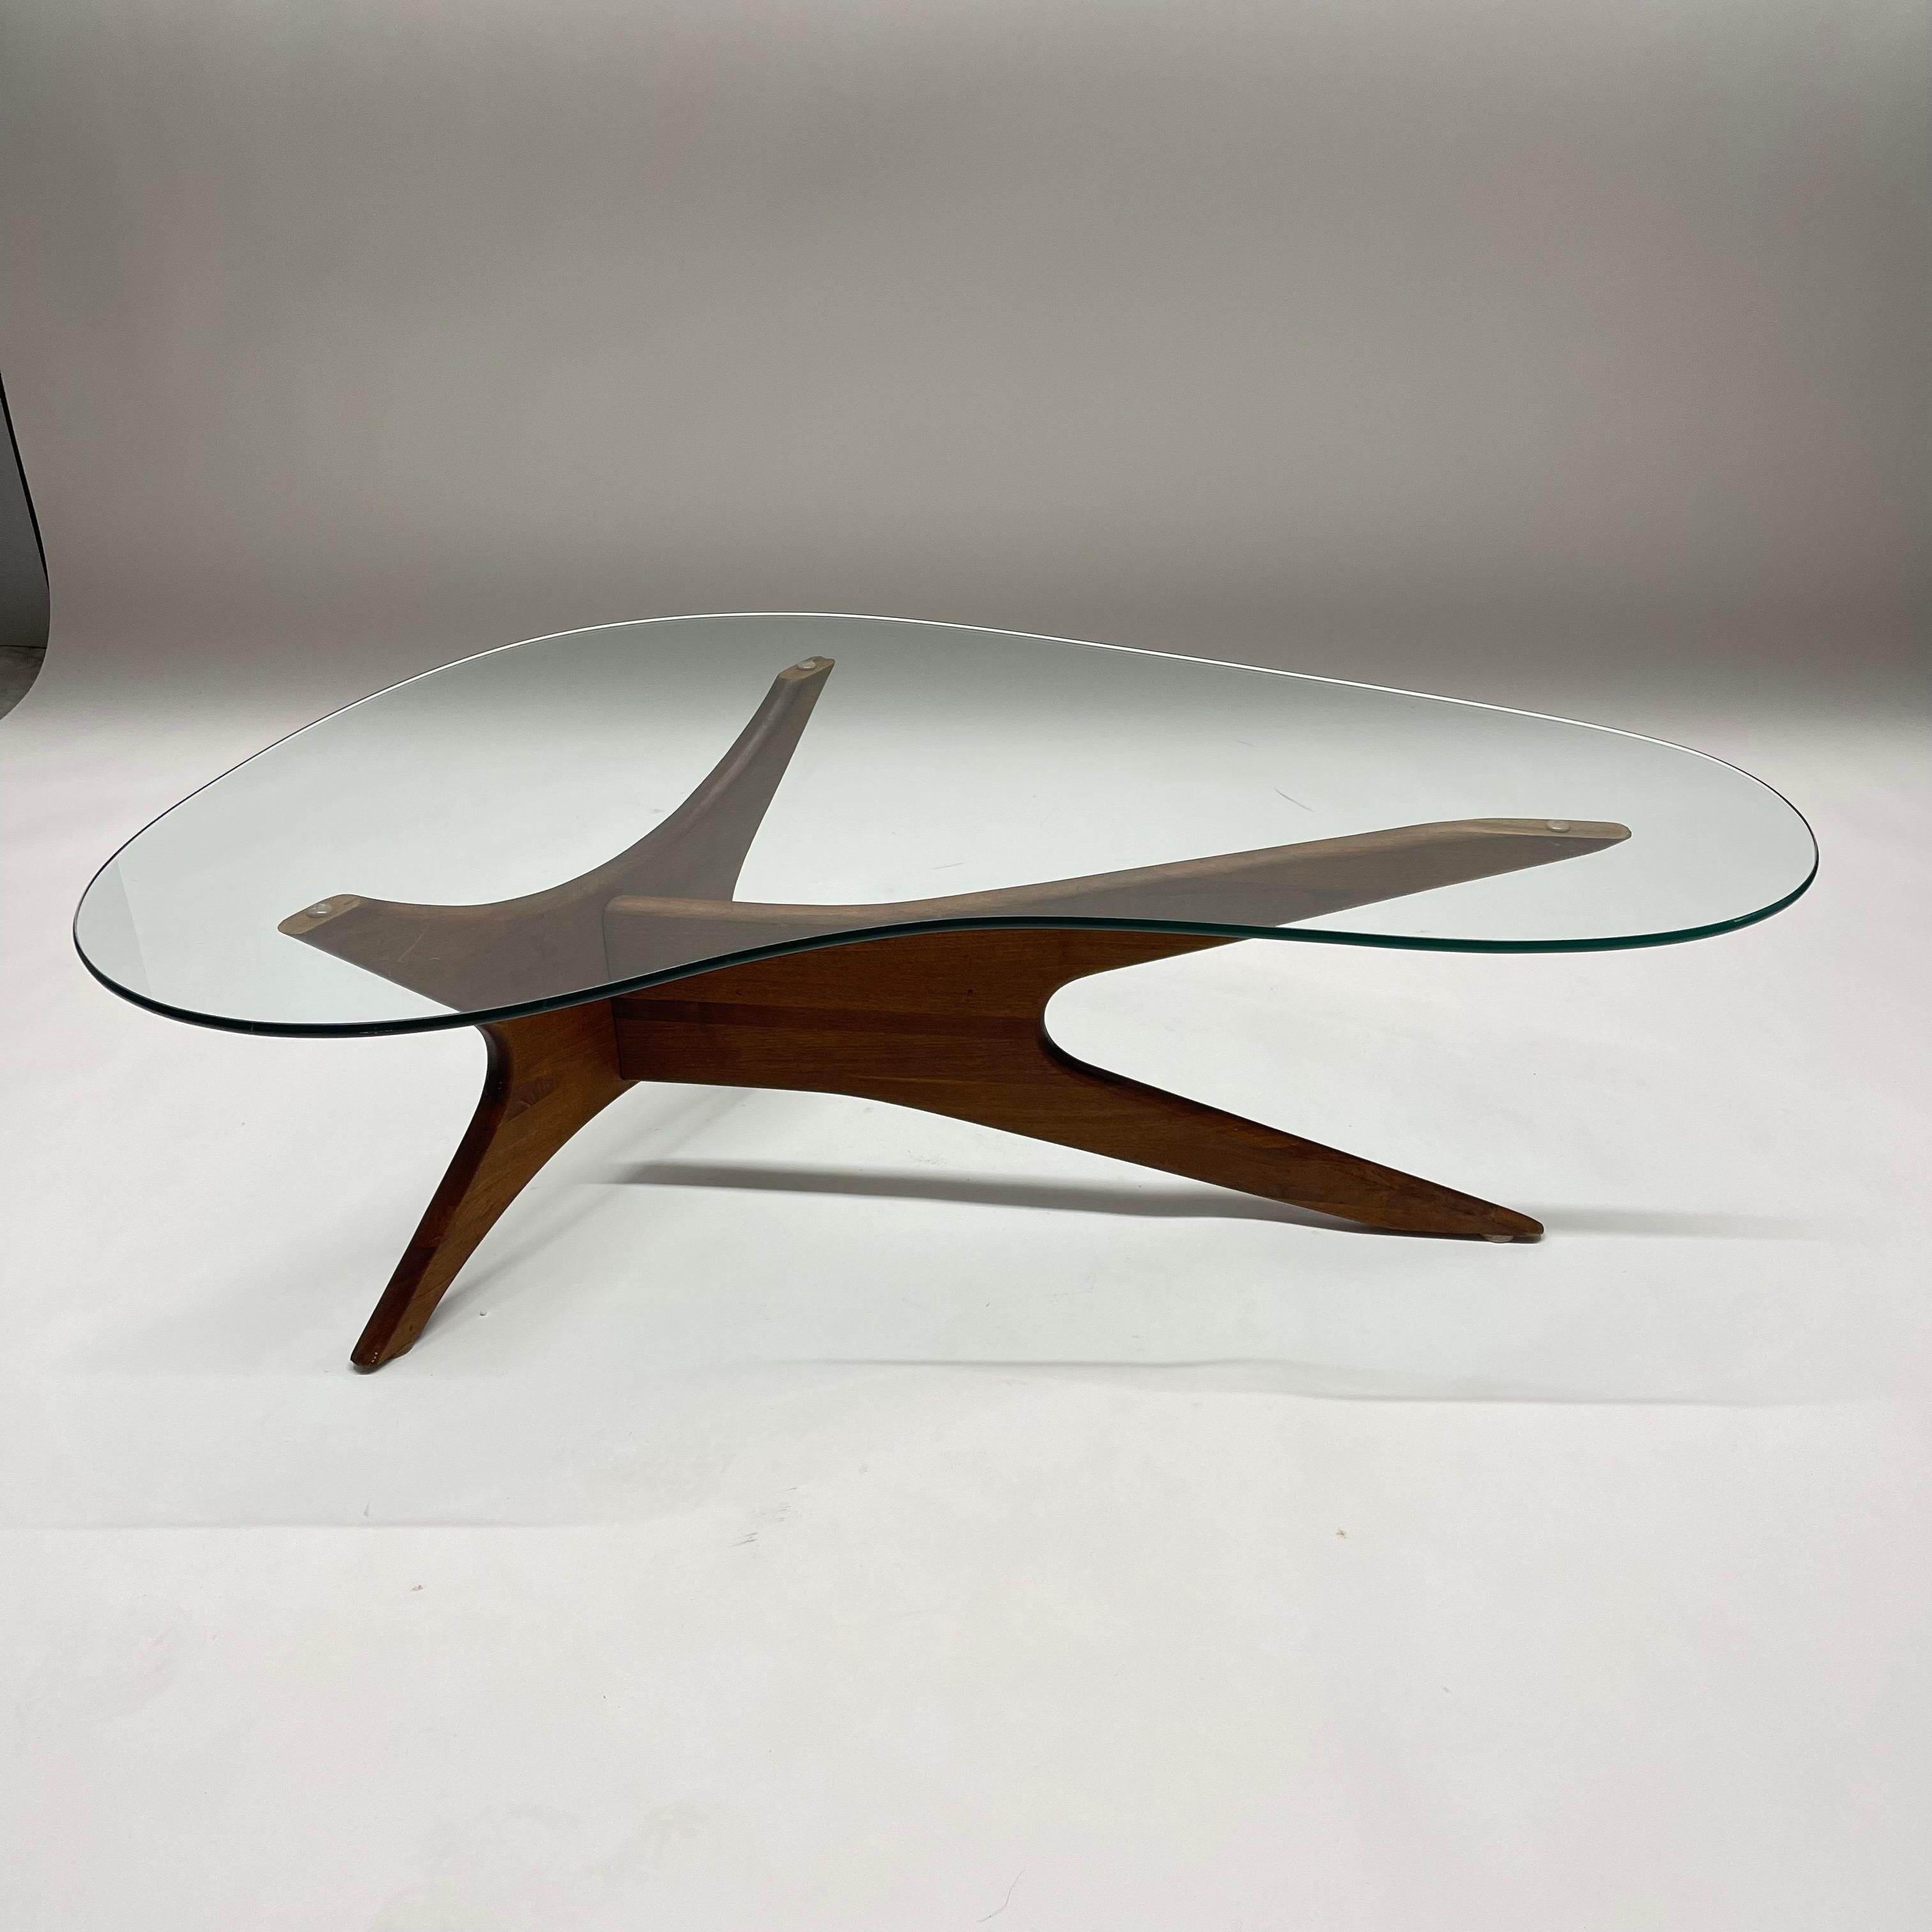 Rare and unique biomorphic kidney shaped coffee or cocktail table rendered in walnut with original glass top, designed by Adrian Pearsall for Craft Associates, Wilkes-Barre , Pa, circa 1960s.